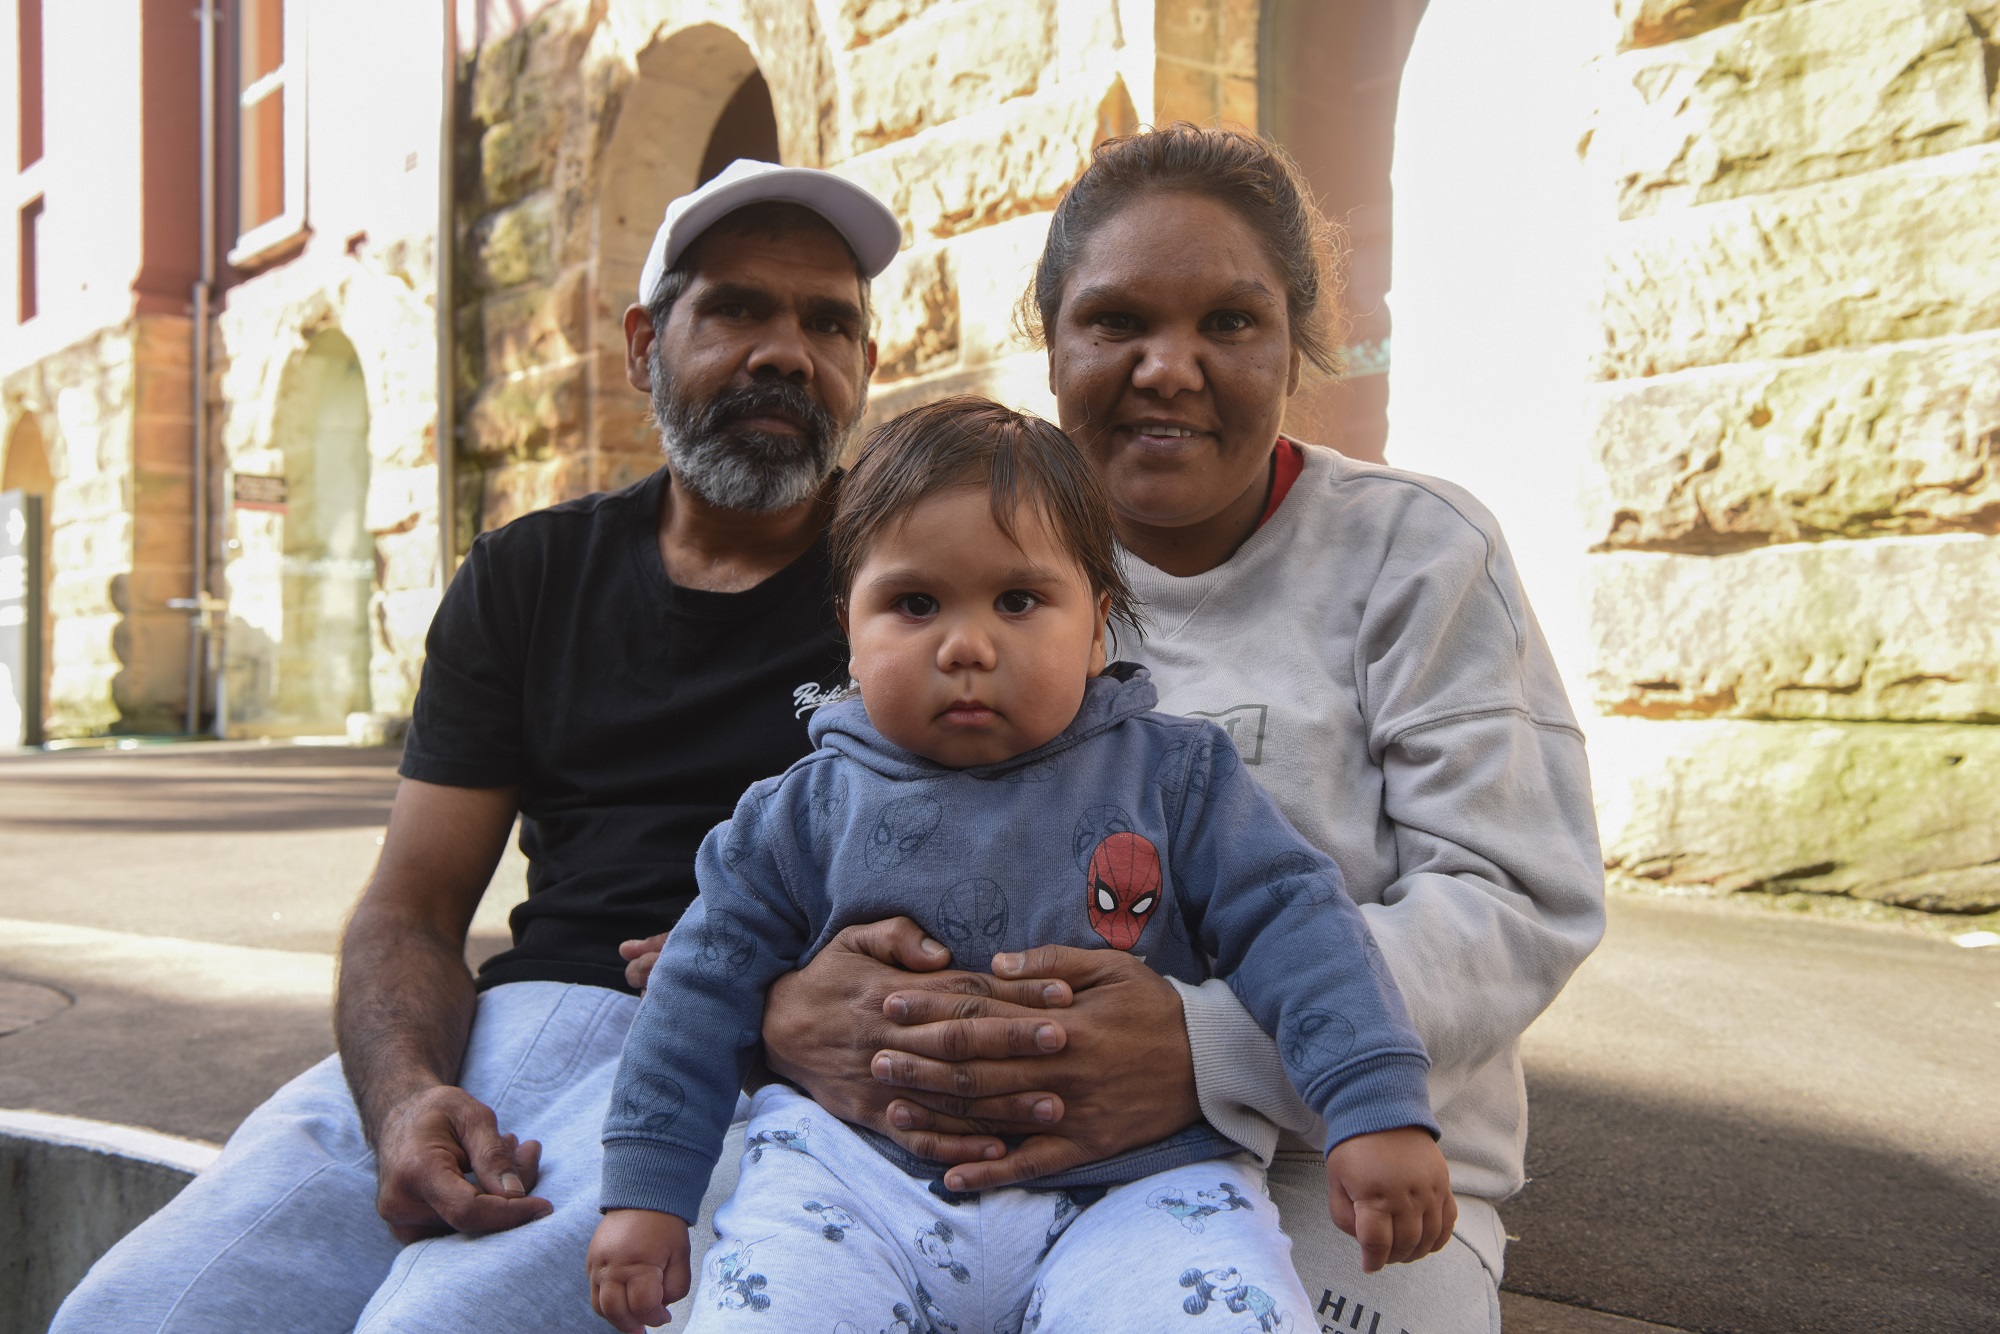 Aboriginal Early Years Program –  Positive outcomes providing support for Aboriginal families